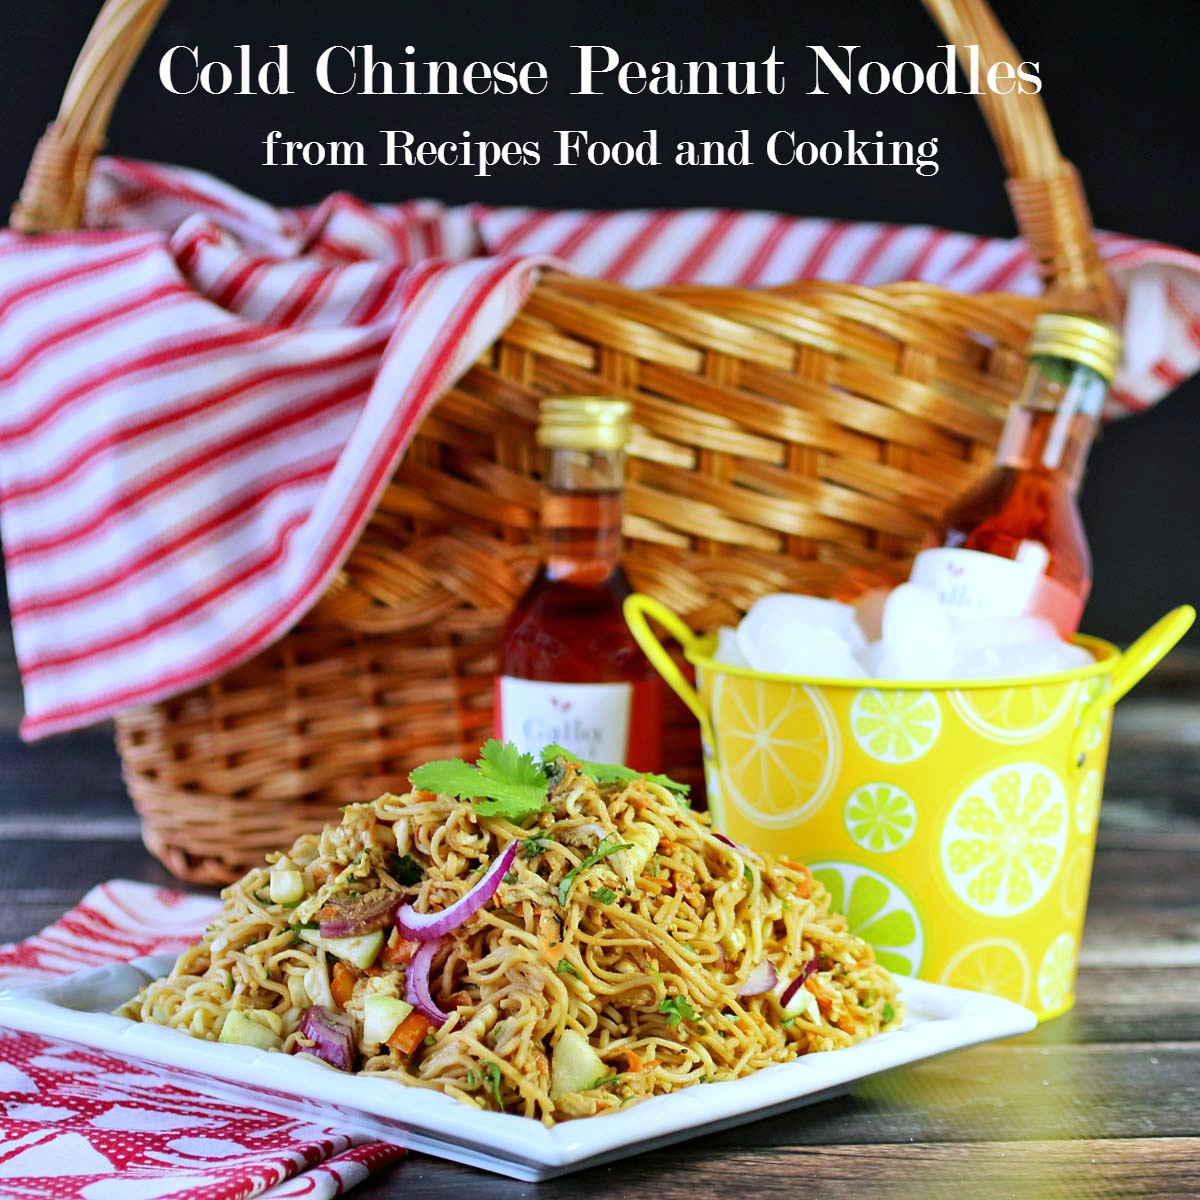 Cold Chinese Peanut Noodles